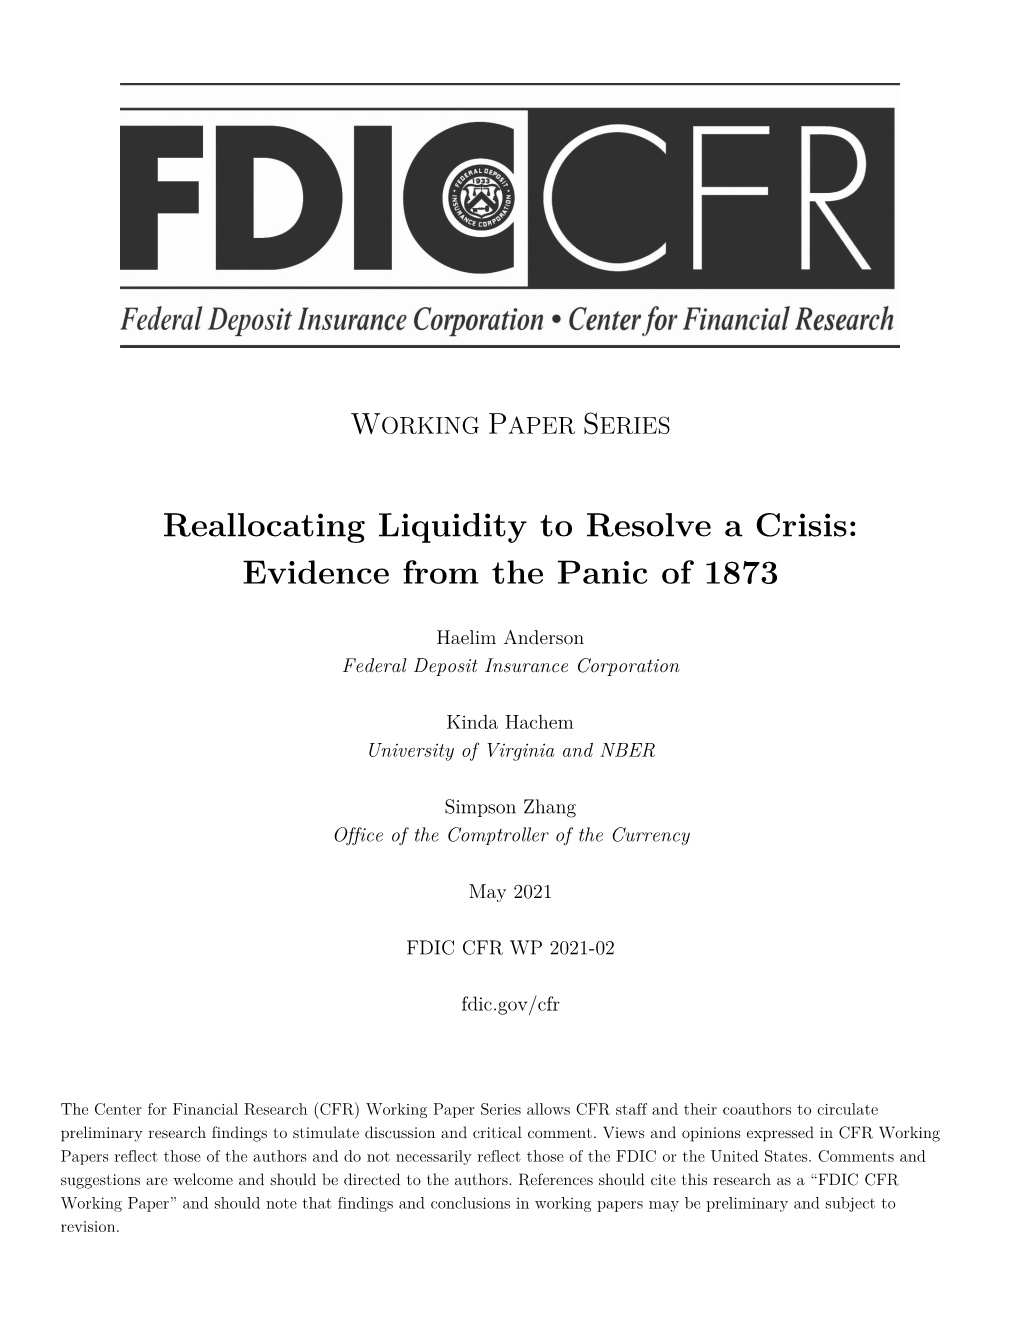 Reallocating Liquidity to Resolve a Crisis: Evidence from the Panic of 1873